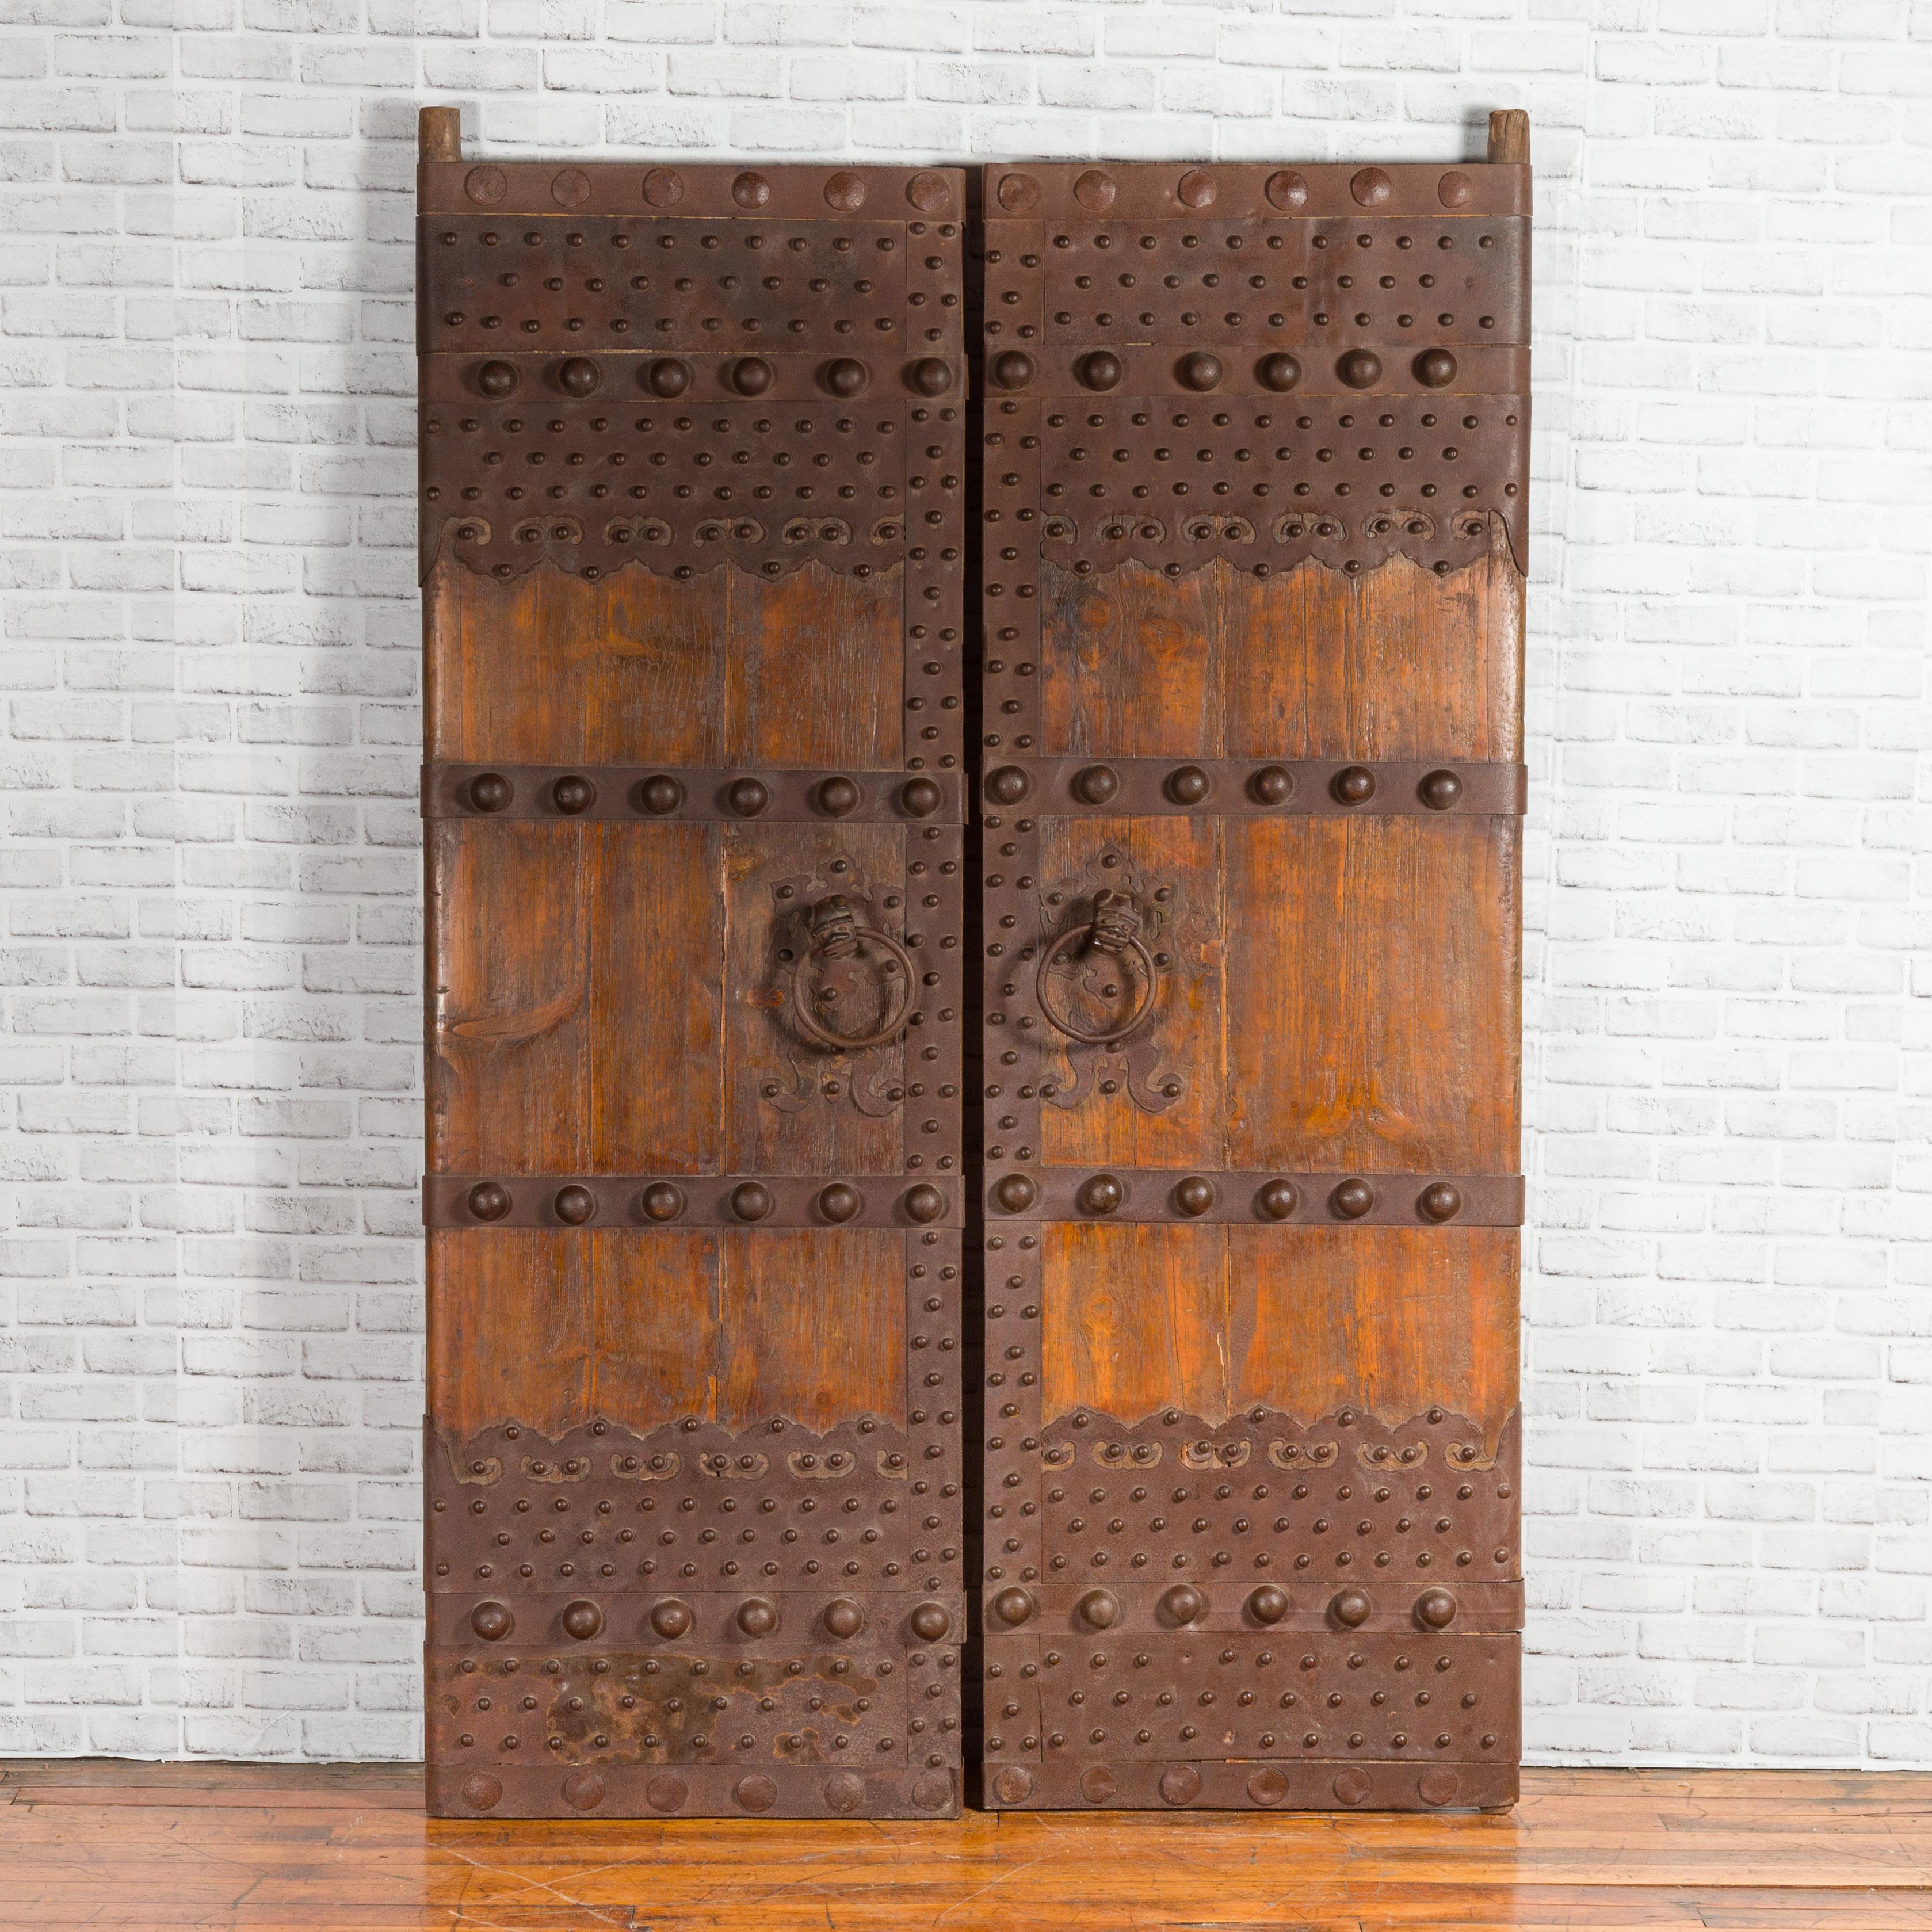 A pair of Chinese Qing Dynasty palace doors from the 19th century, with iron hardware and dark patina. 
The doors are 26